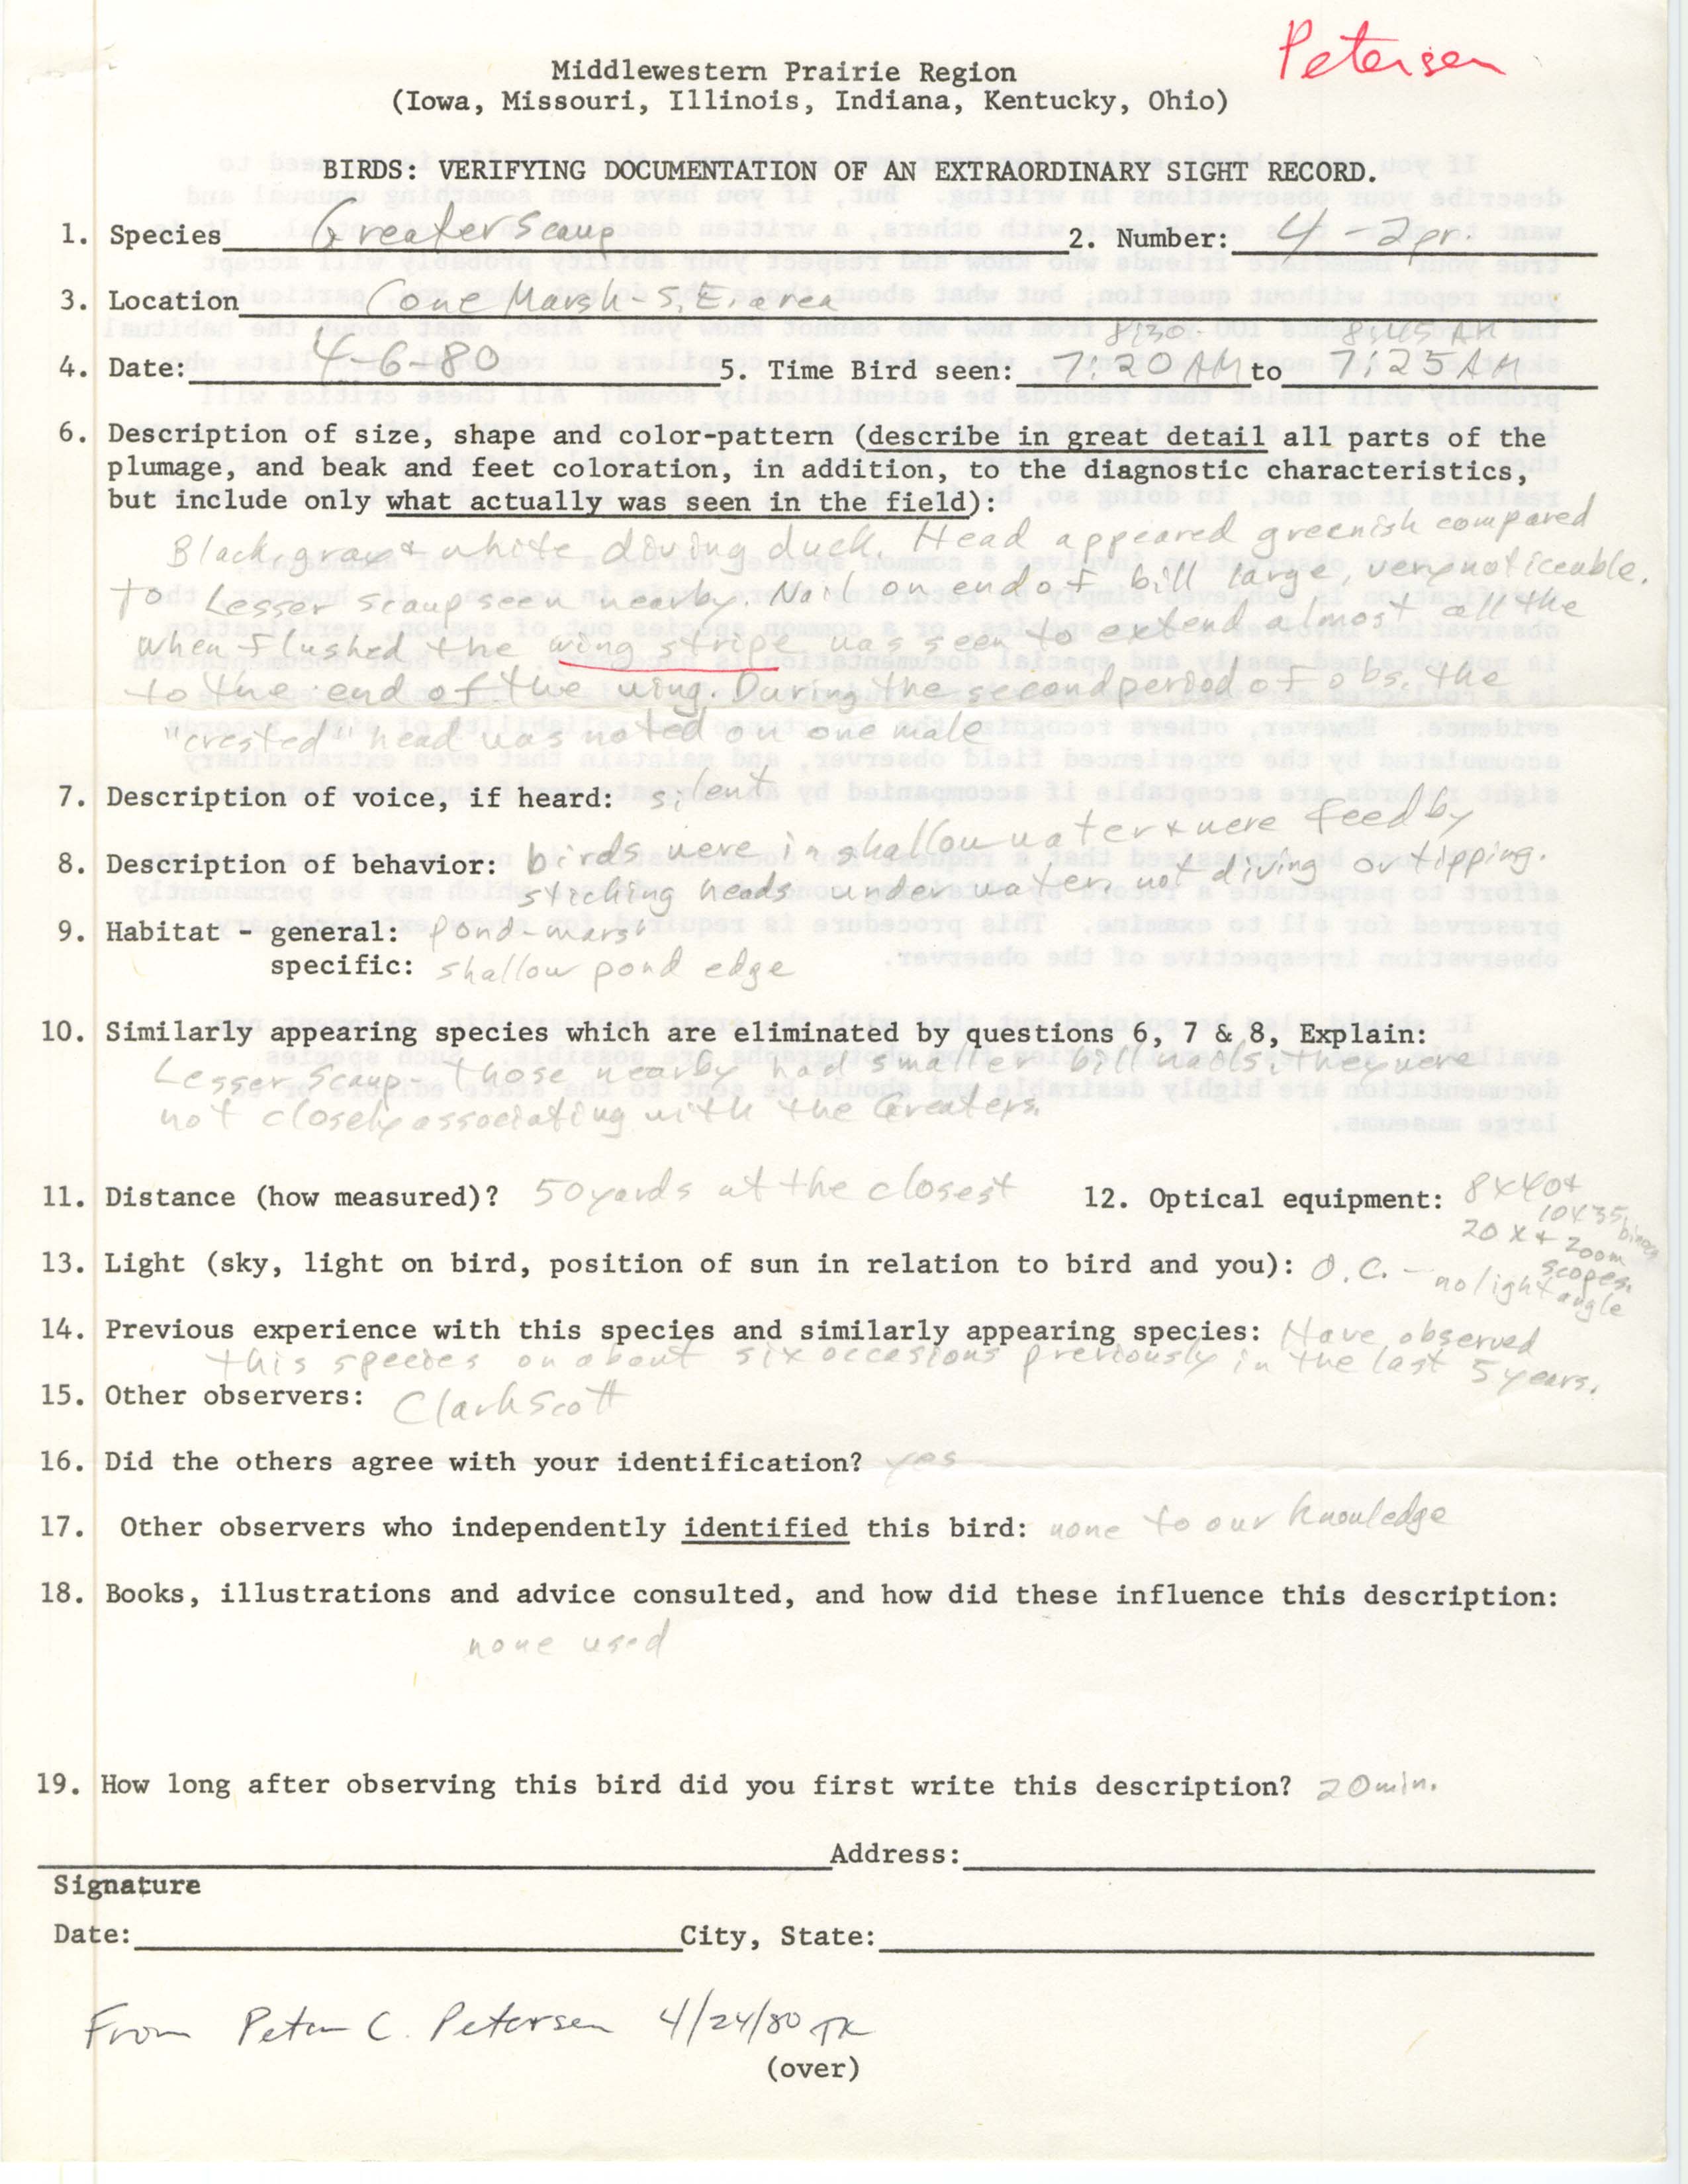 Rare bird documentation form for Greater Scaup at Cone Marsh, 1980